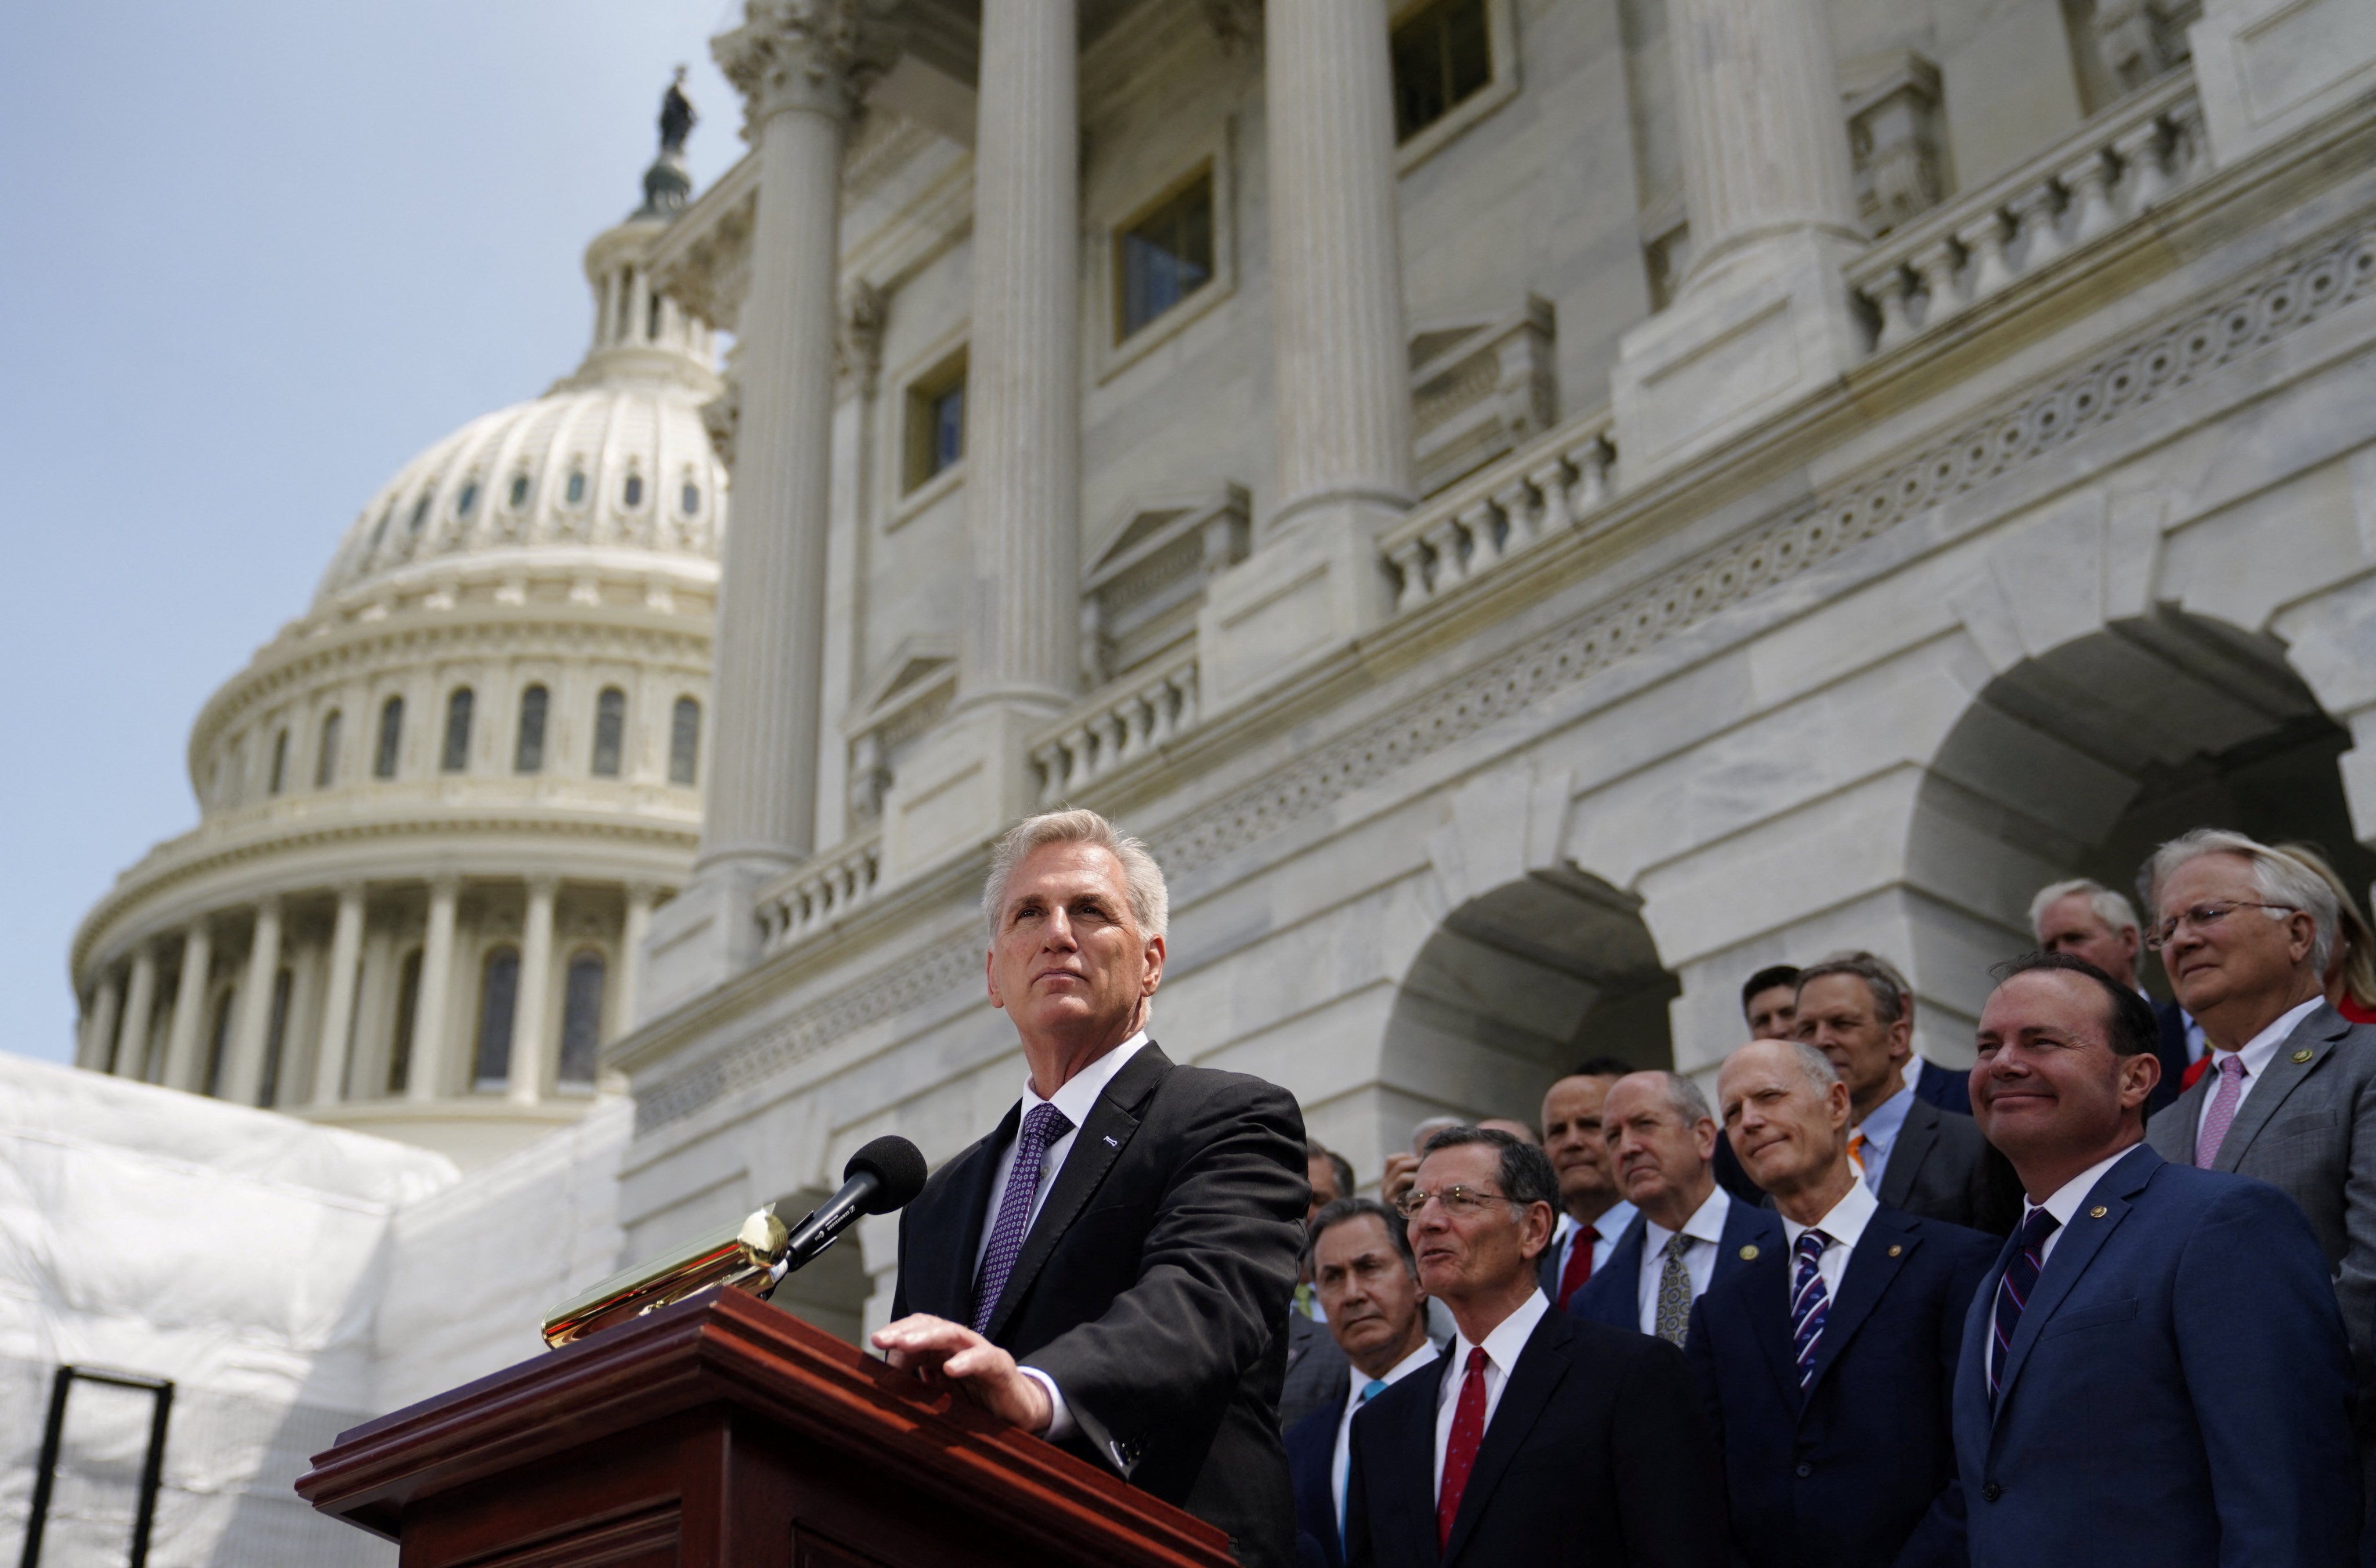 US Speaker of the House Kevin McCarthy (right) stands with Congressional Republicans during an event addressing debt ceiling negotiations with President Joe Biden outside the US Capitol in Washington on May 17. Photo: Reuters